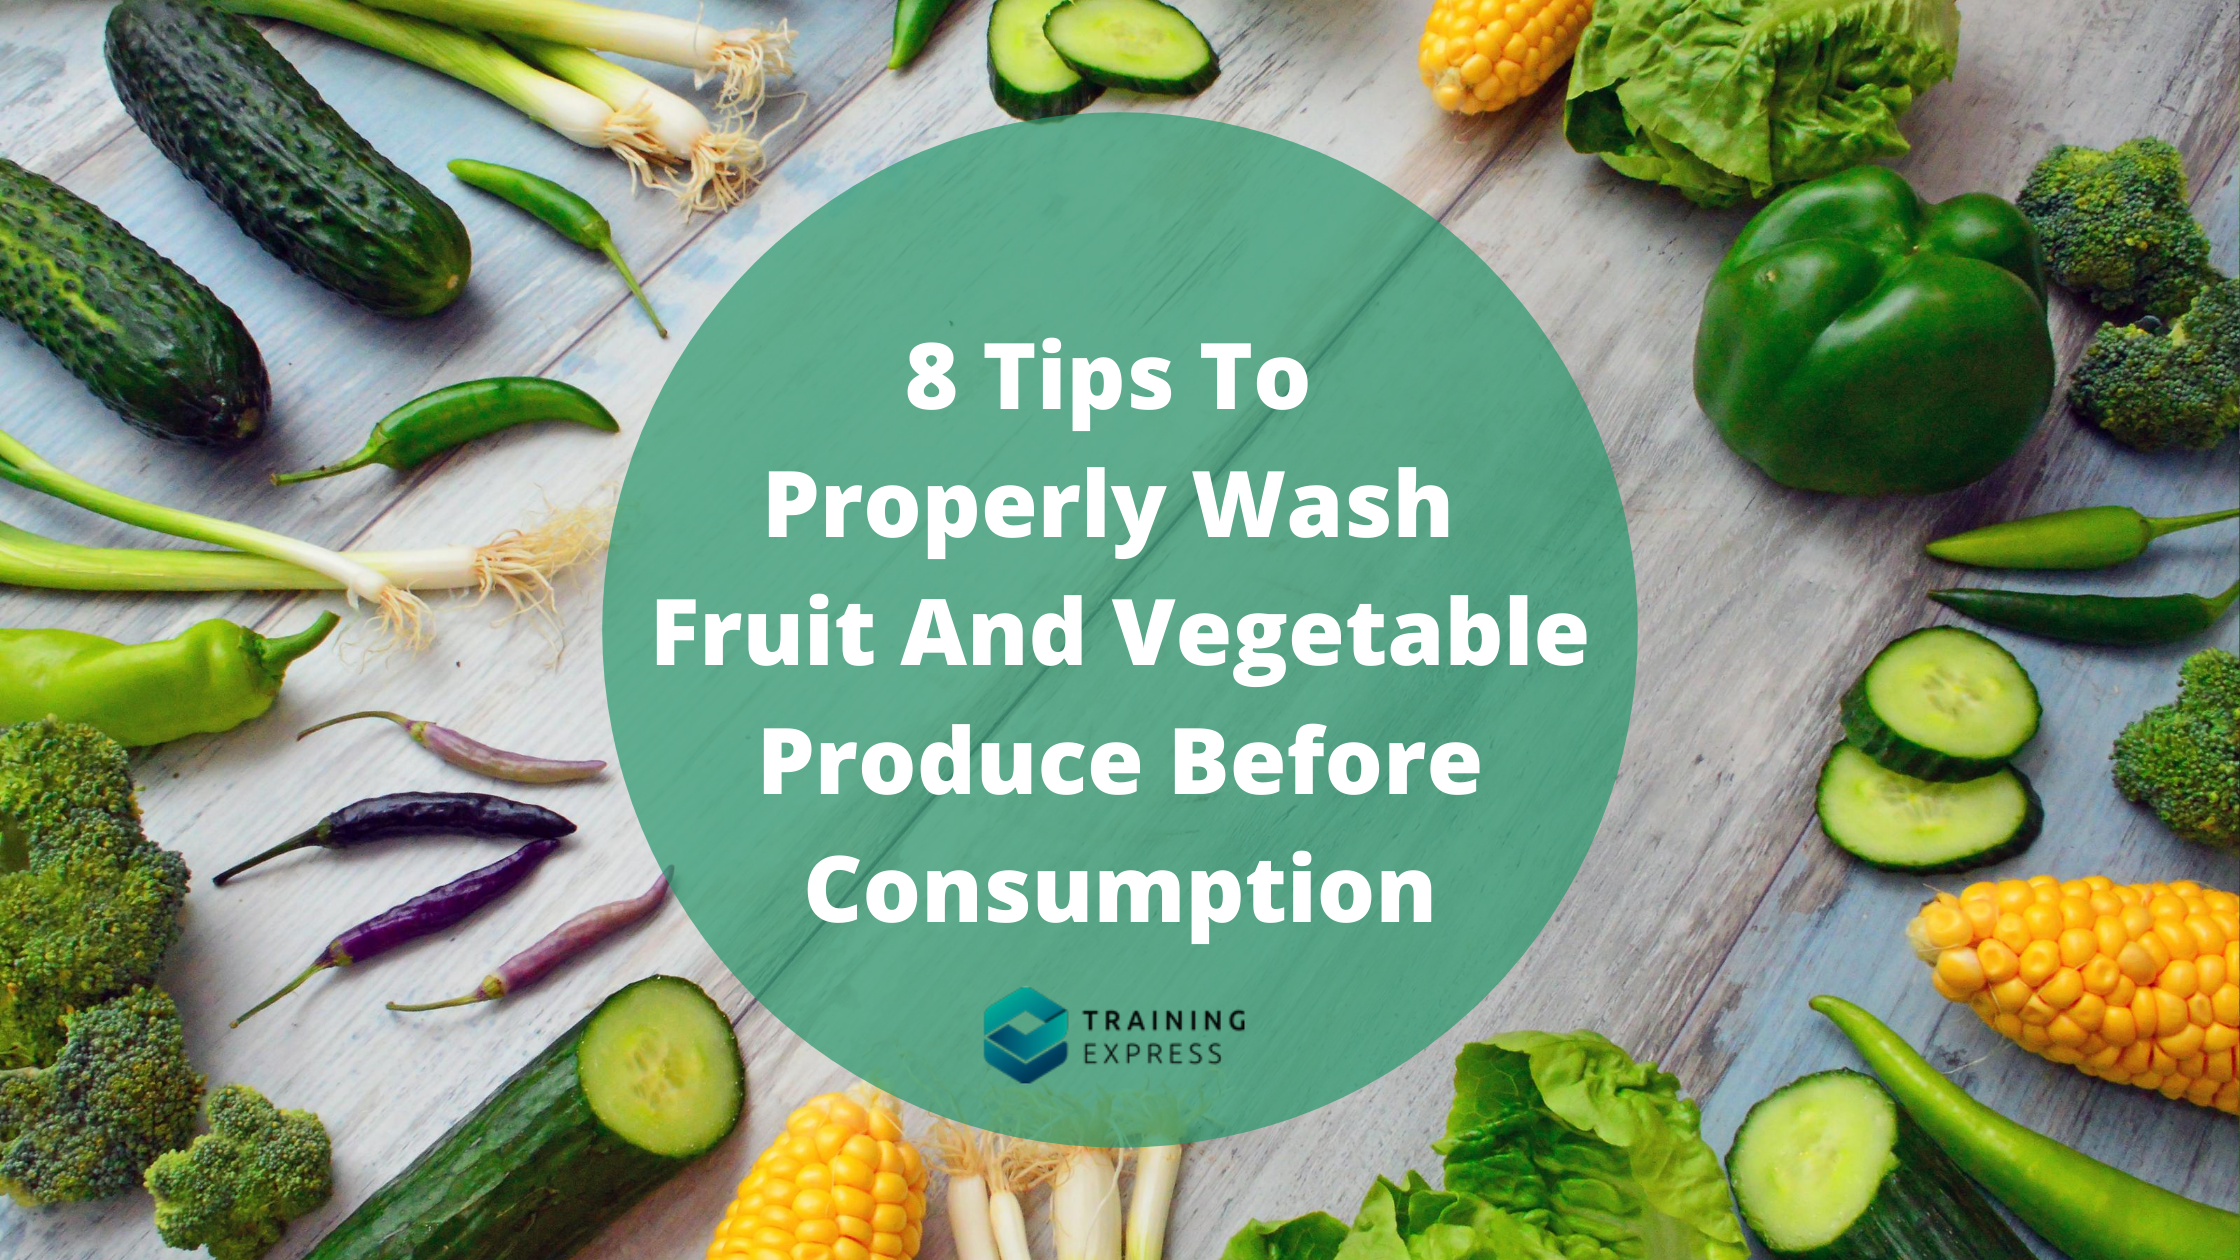 How important is it to wash fruits and vegetables before eating